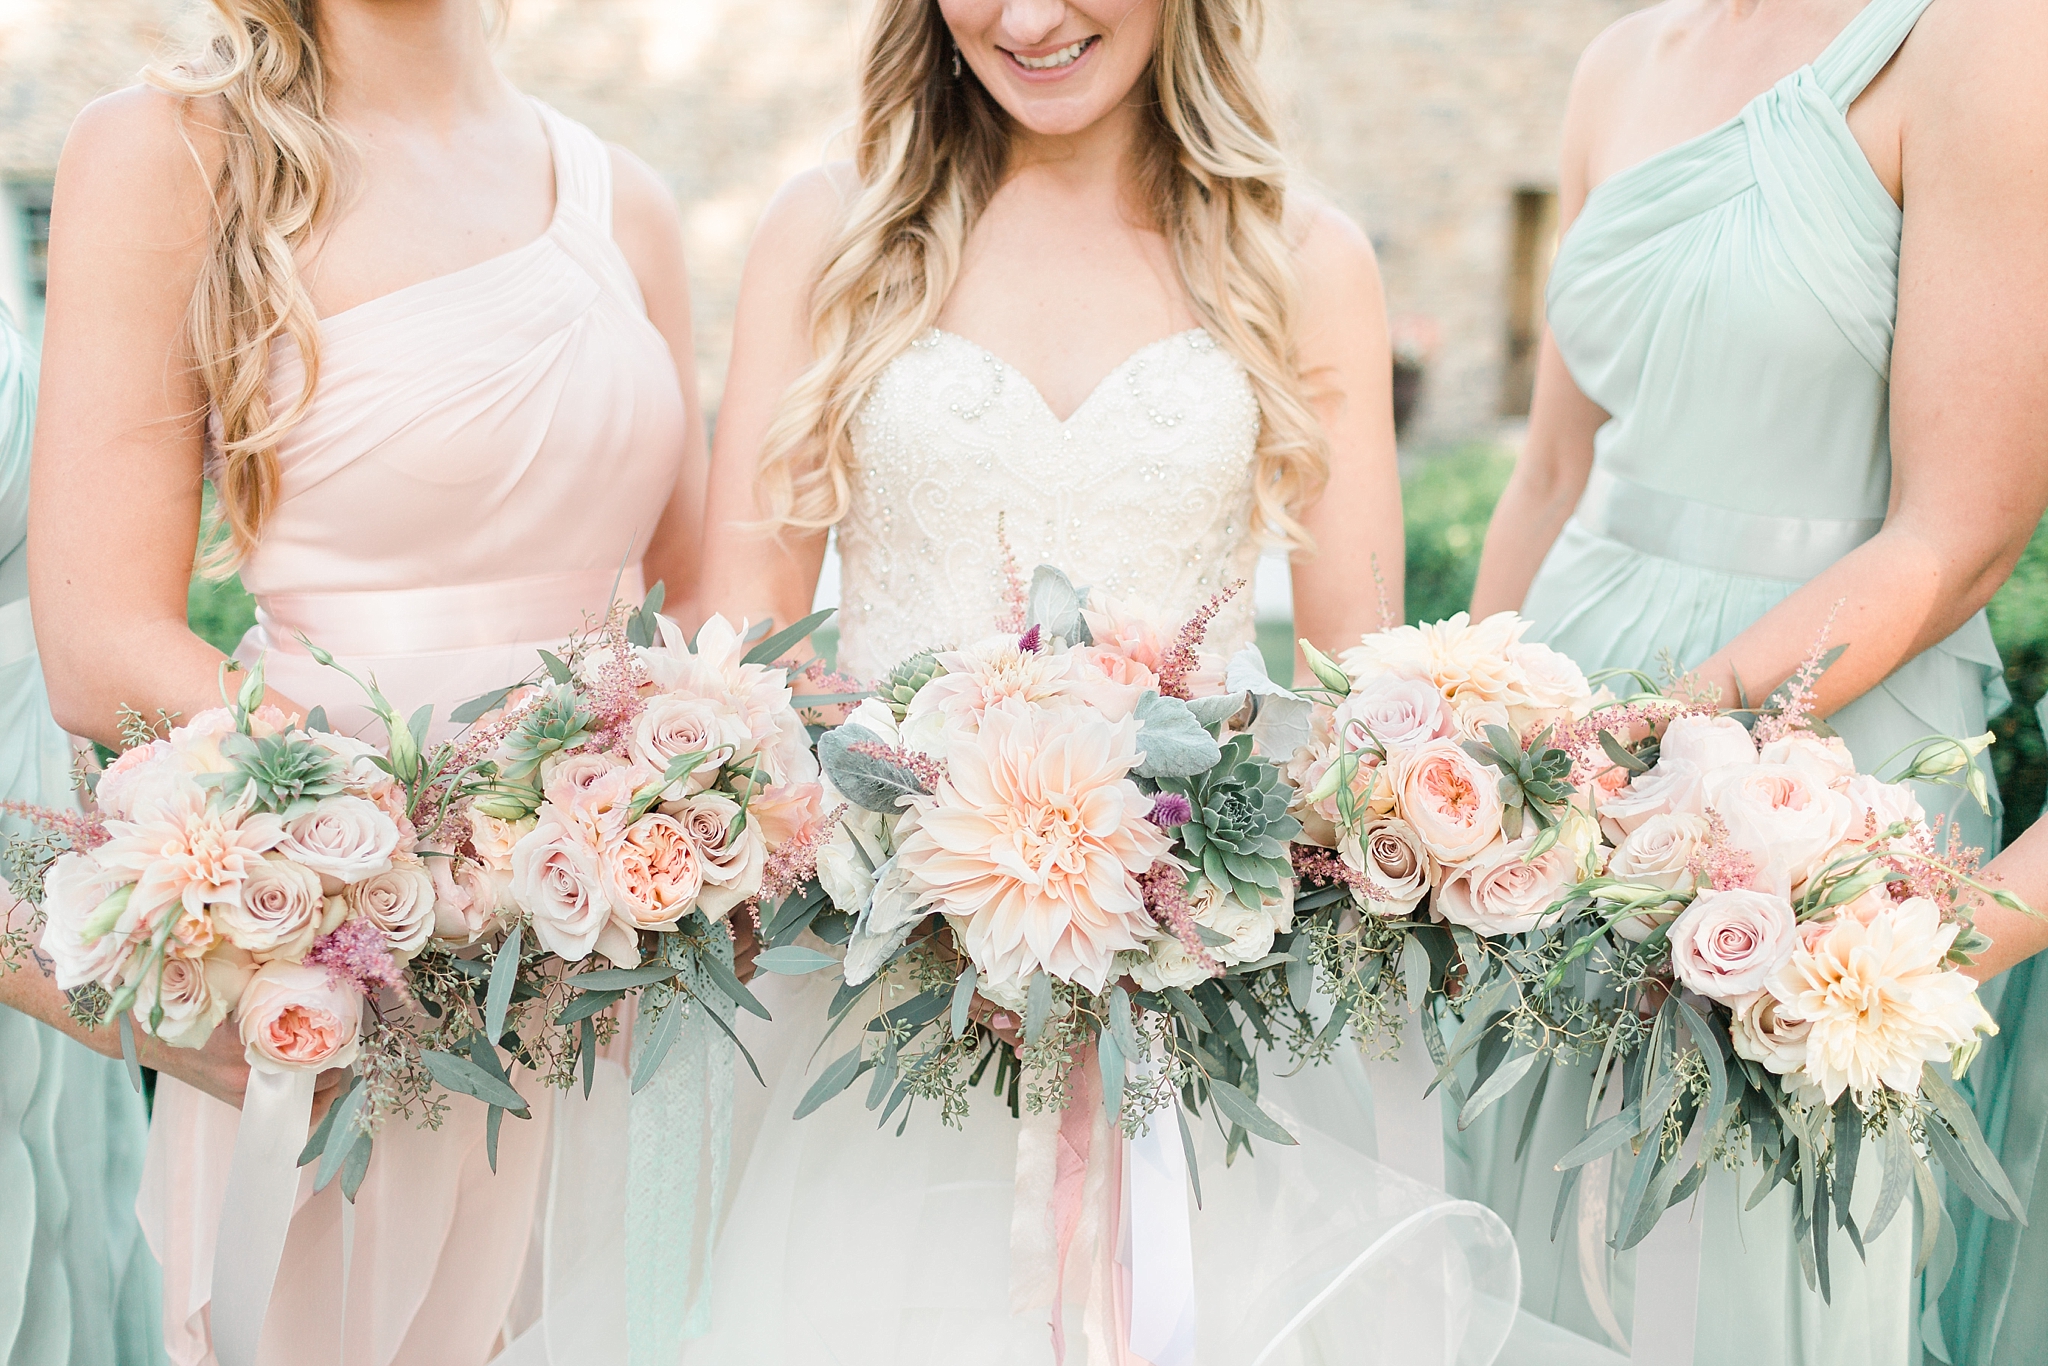 Your MOH plans the bachelorette party, bridal shower, and stand by you on the big day; she certainly deserves to stand out and here are a few ideas of how!